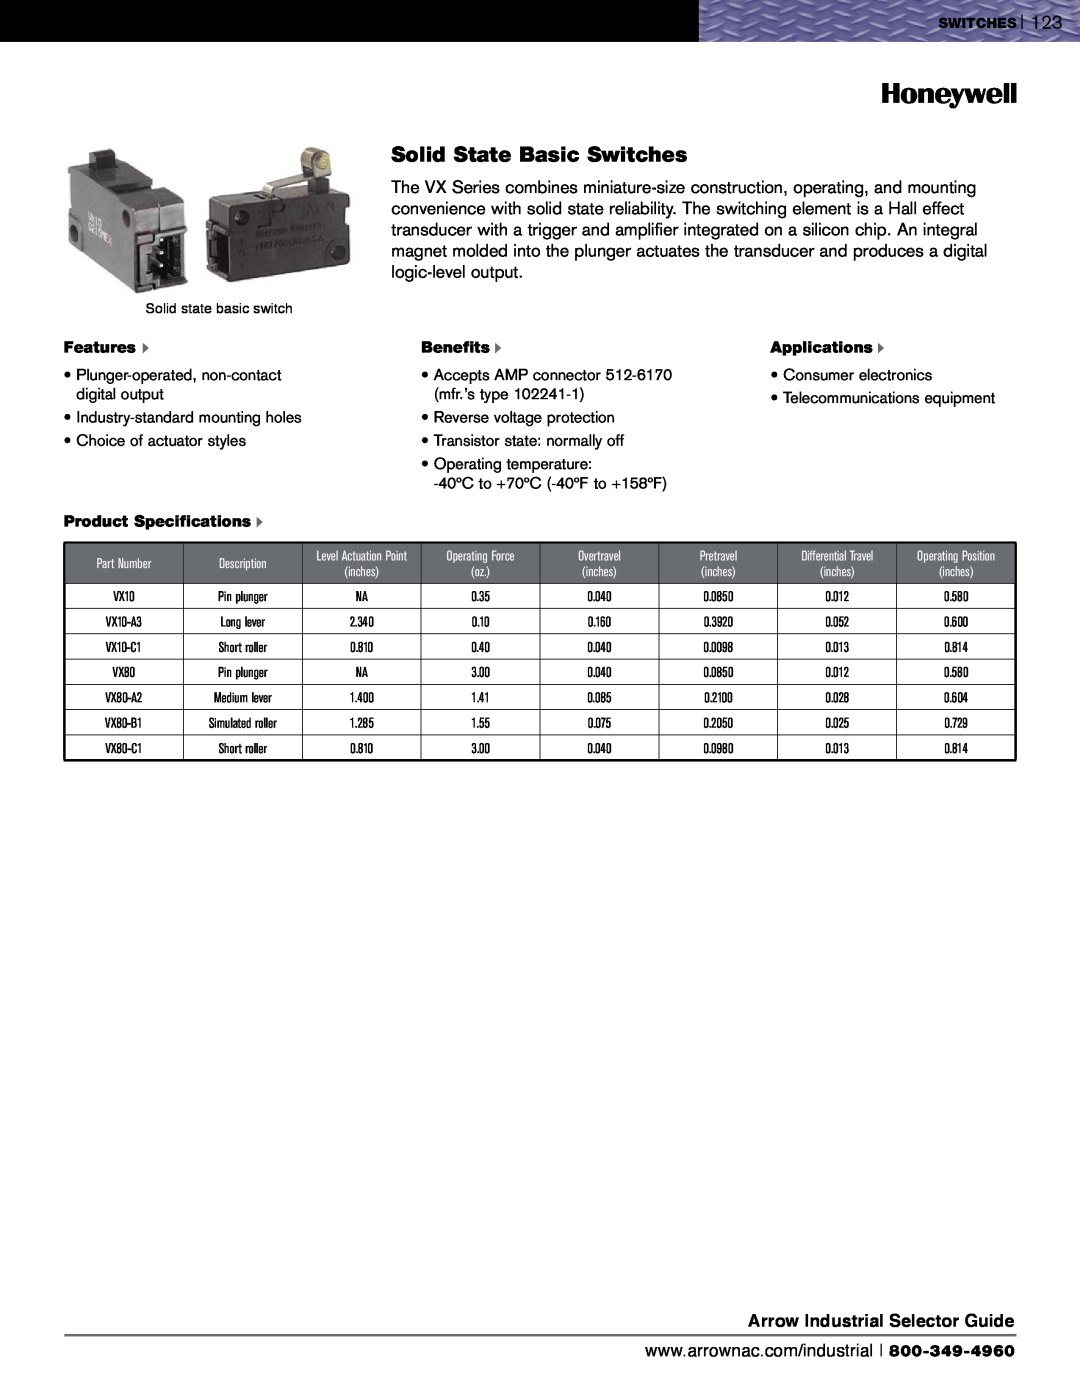 Honeywell SZL-VL Series specifications Solid State Basic Switches, Arrow Industrial Selector Guide, Features u, Benefits u 